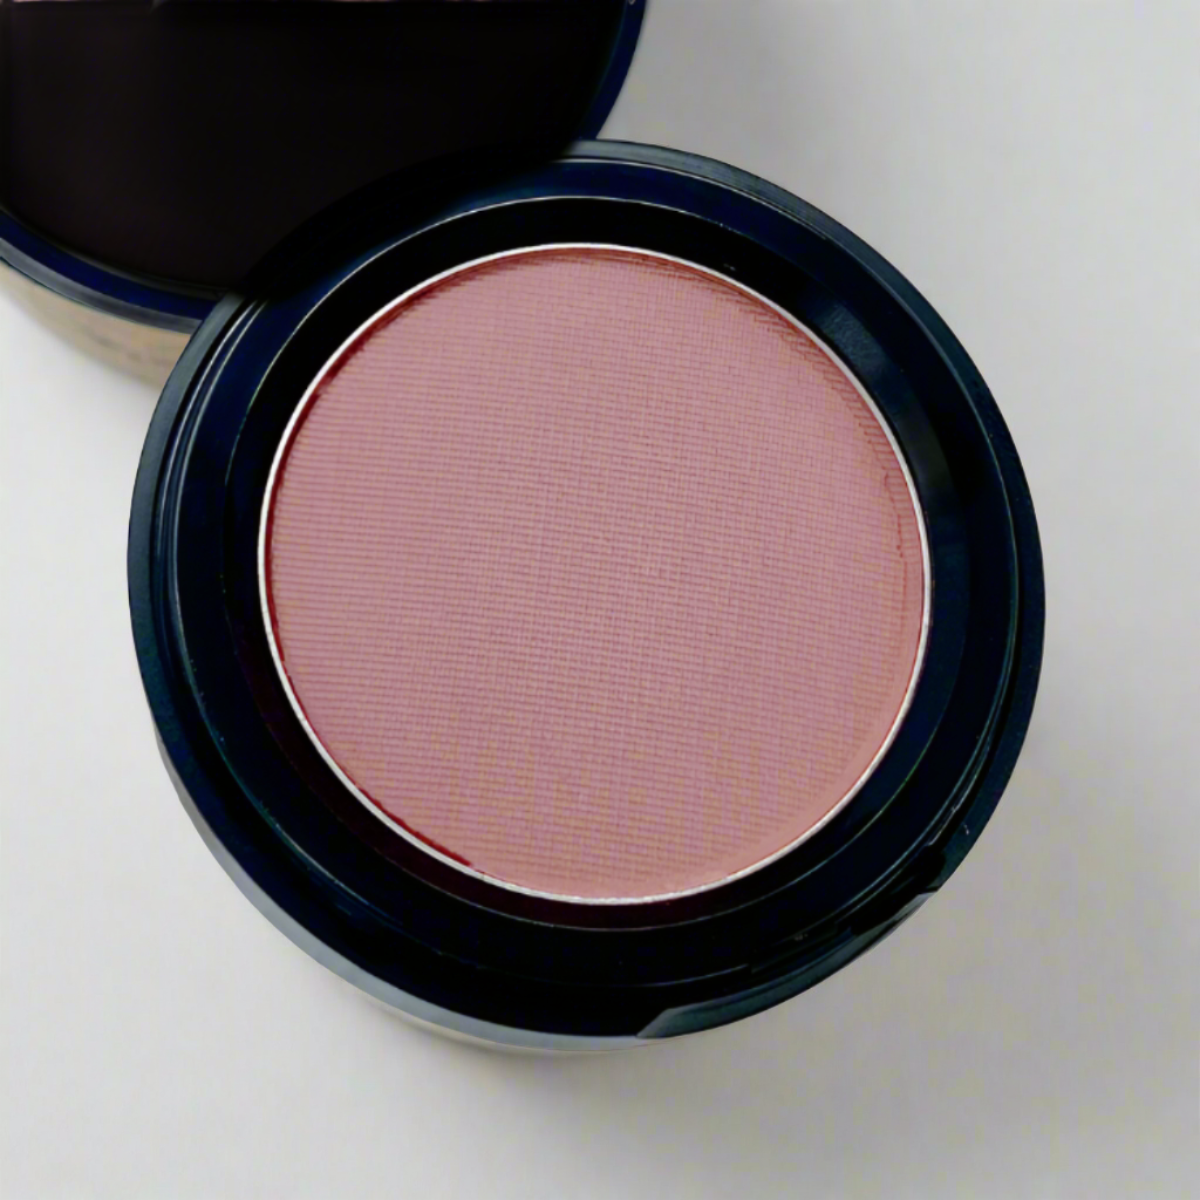 A jar of Au Naturale Matte Blush: A delicate light mauve pink shade, crafted to accentuate natural blush tones with a subtle and flattering touch